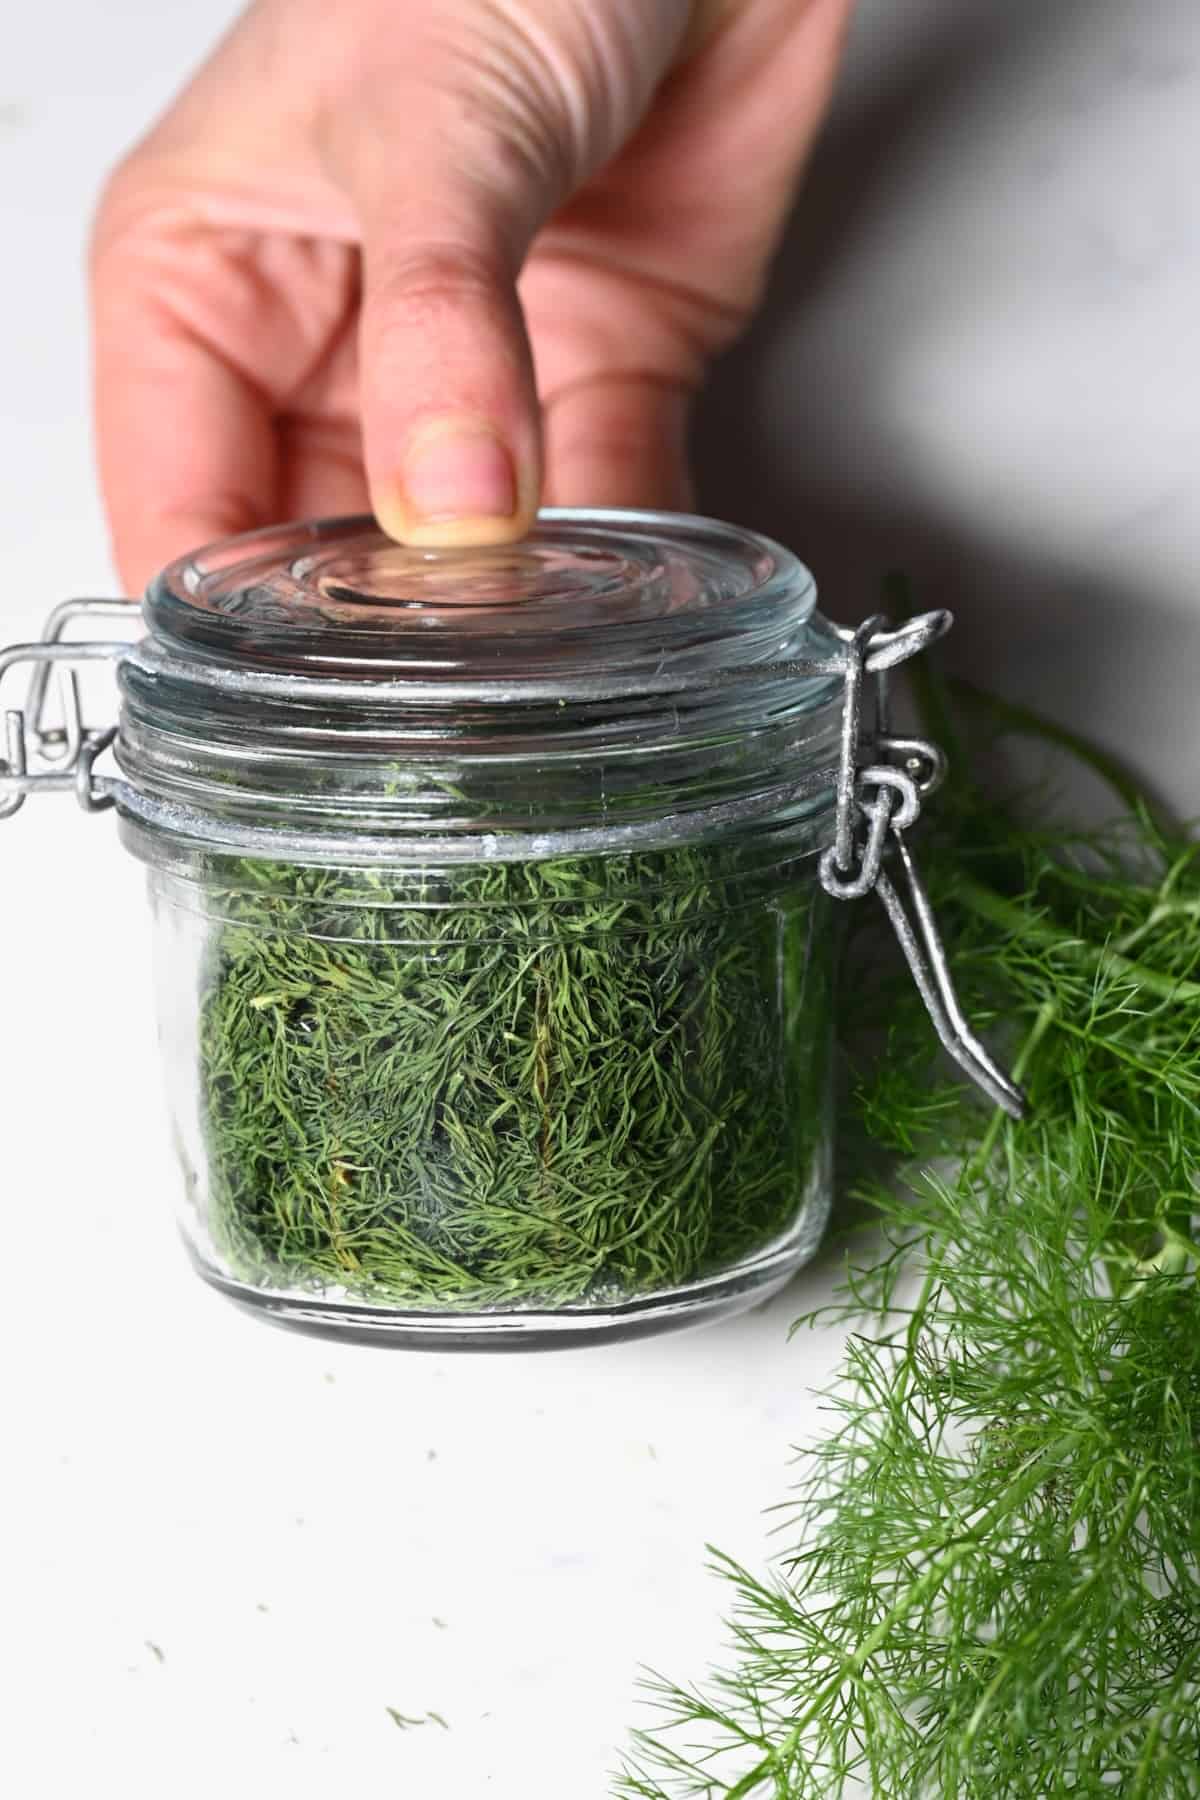 Storing dried dill in a glass container